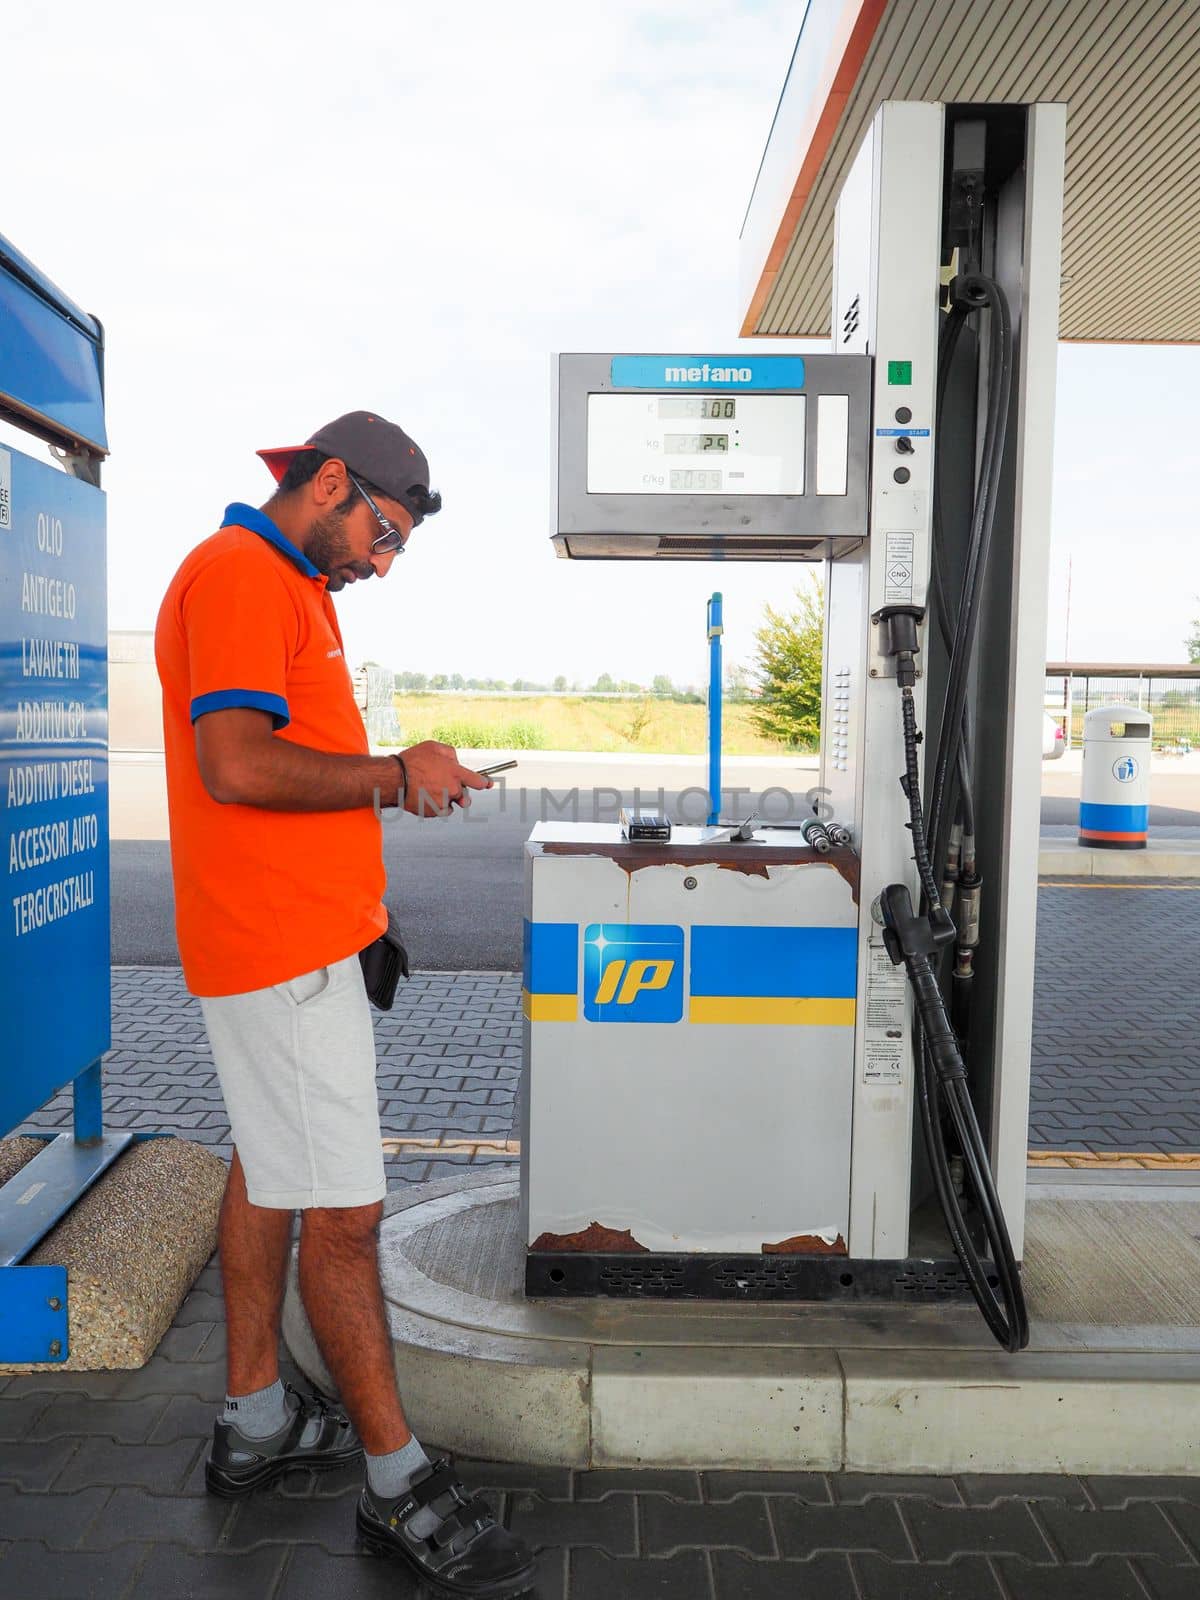 Caorso, Italy - September 2022 fuel pump dislpay showing price and liters of fuel by verbano